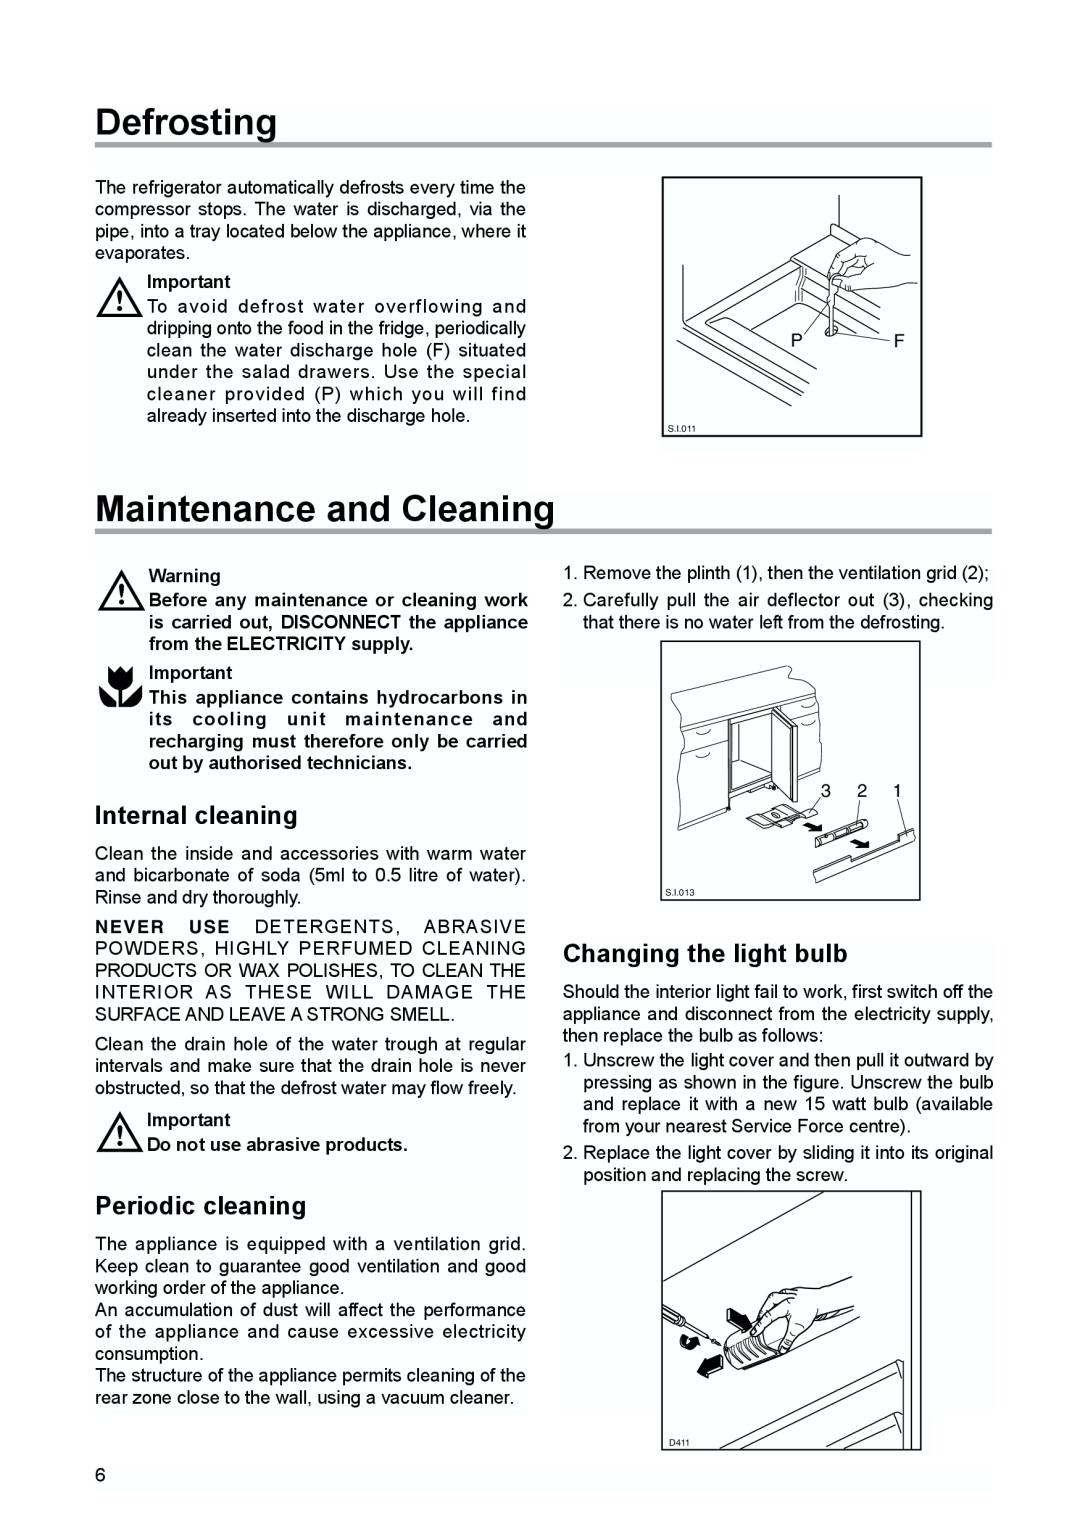 Zanussi ZQS 6140 manual Defrosting, Maintenance and Cleaning, Internal cleaning, Periodic cleaning, Changing the light bulb 